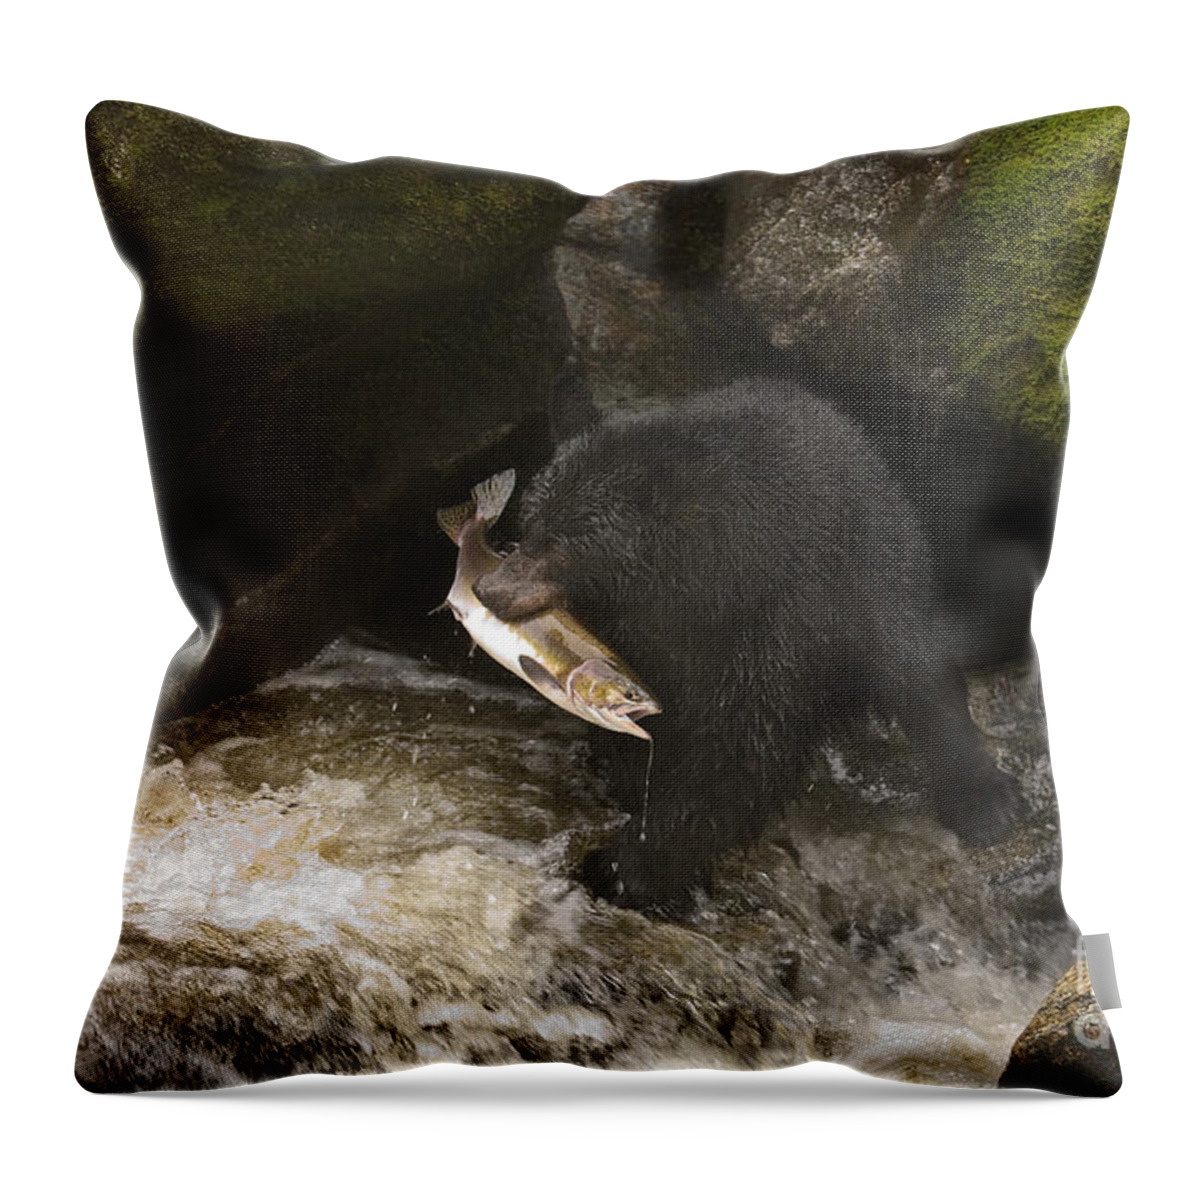 Animal Throw Pillow featuring the photograph Black Bear With Salmon #1 by Ron Sanford